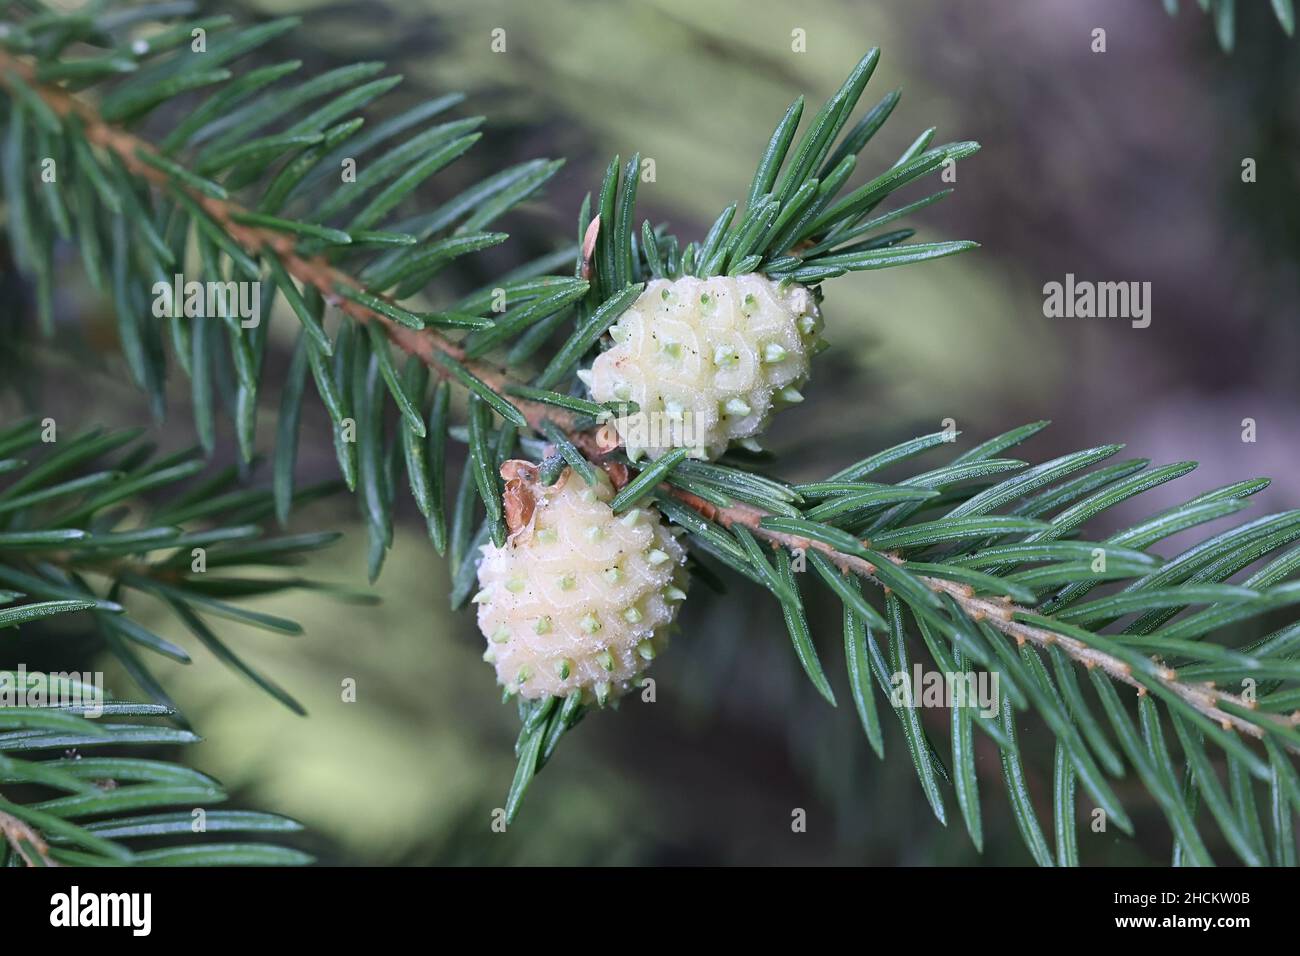 Adelges laricis, known as pale spruce gall adelgid, a plant parasite forming galls on European spruce, Picea abies Stock Photo